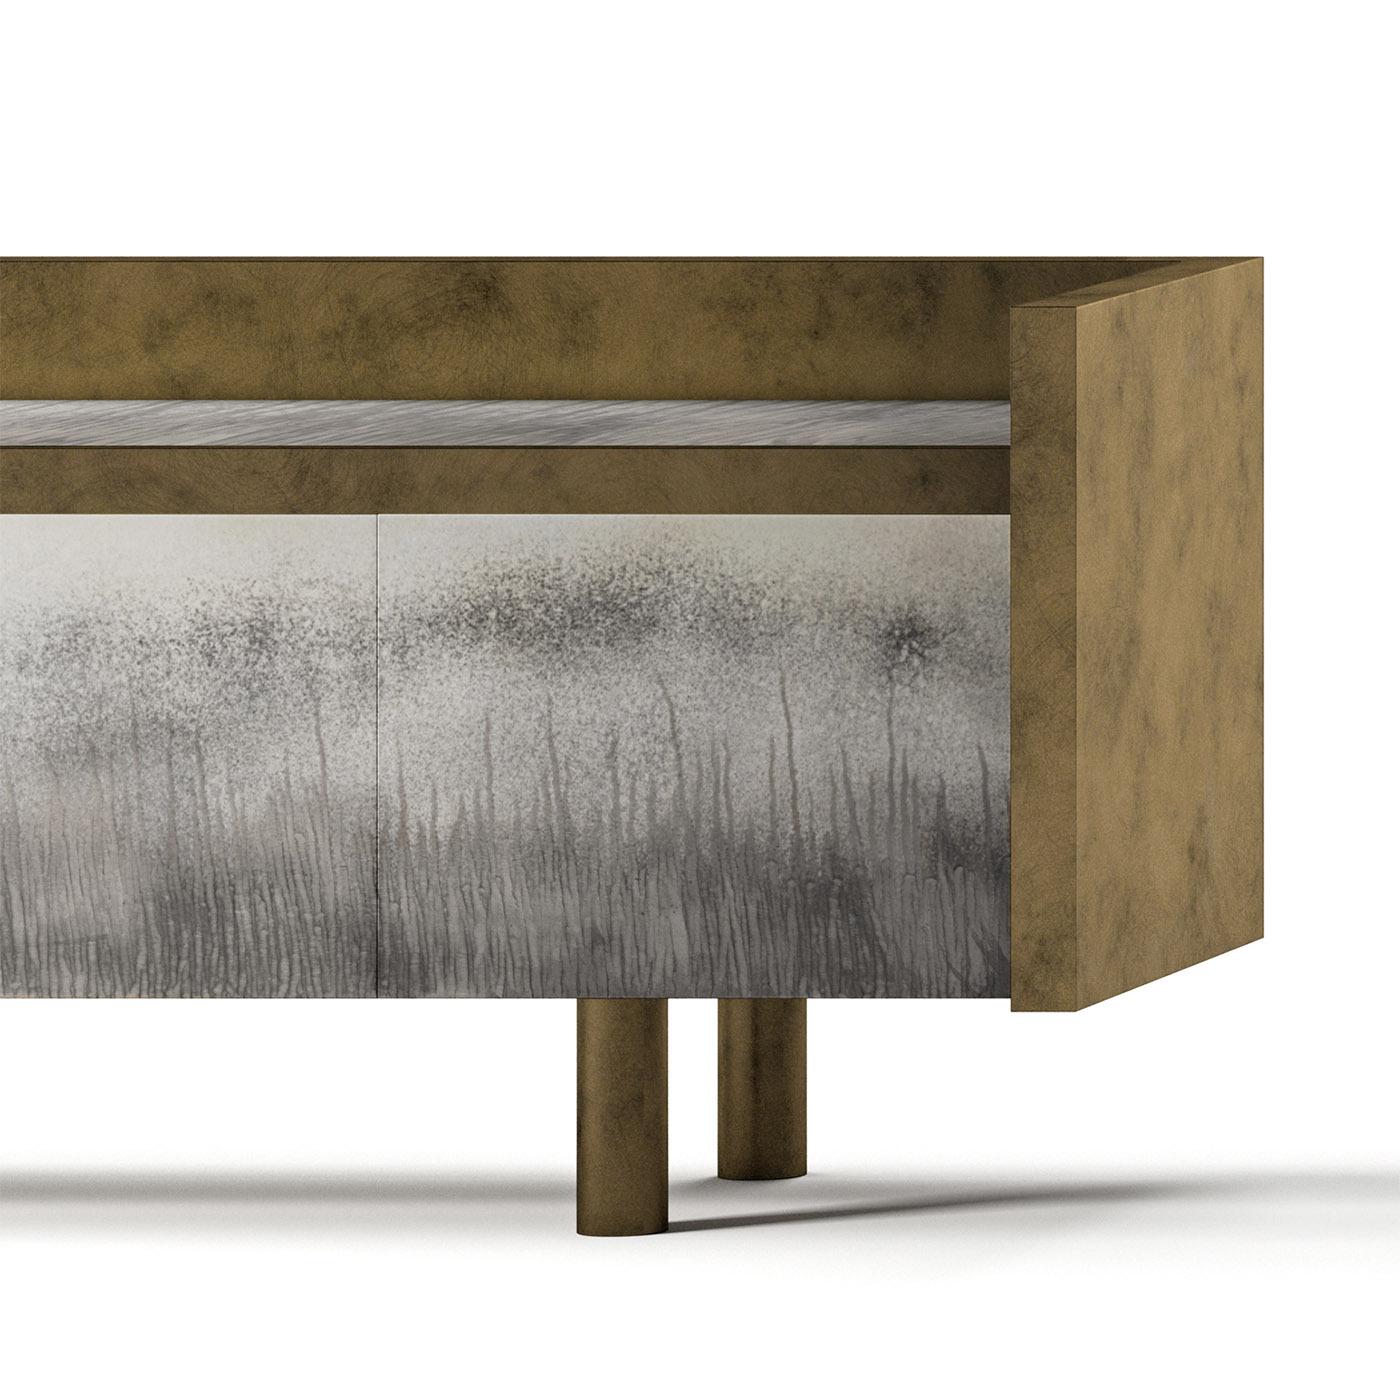 Designed by Leo De Carlo for the Boulder collection, this contemporary sideboard is characterized by a finishing that resembles 